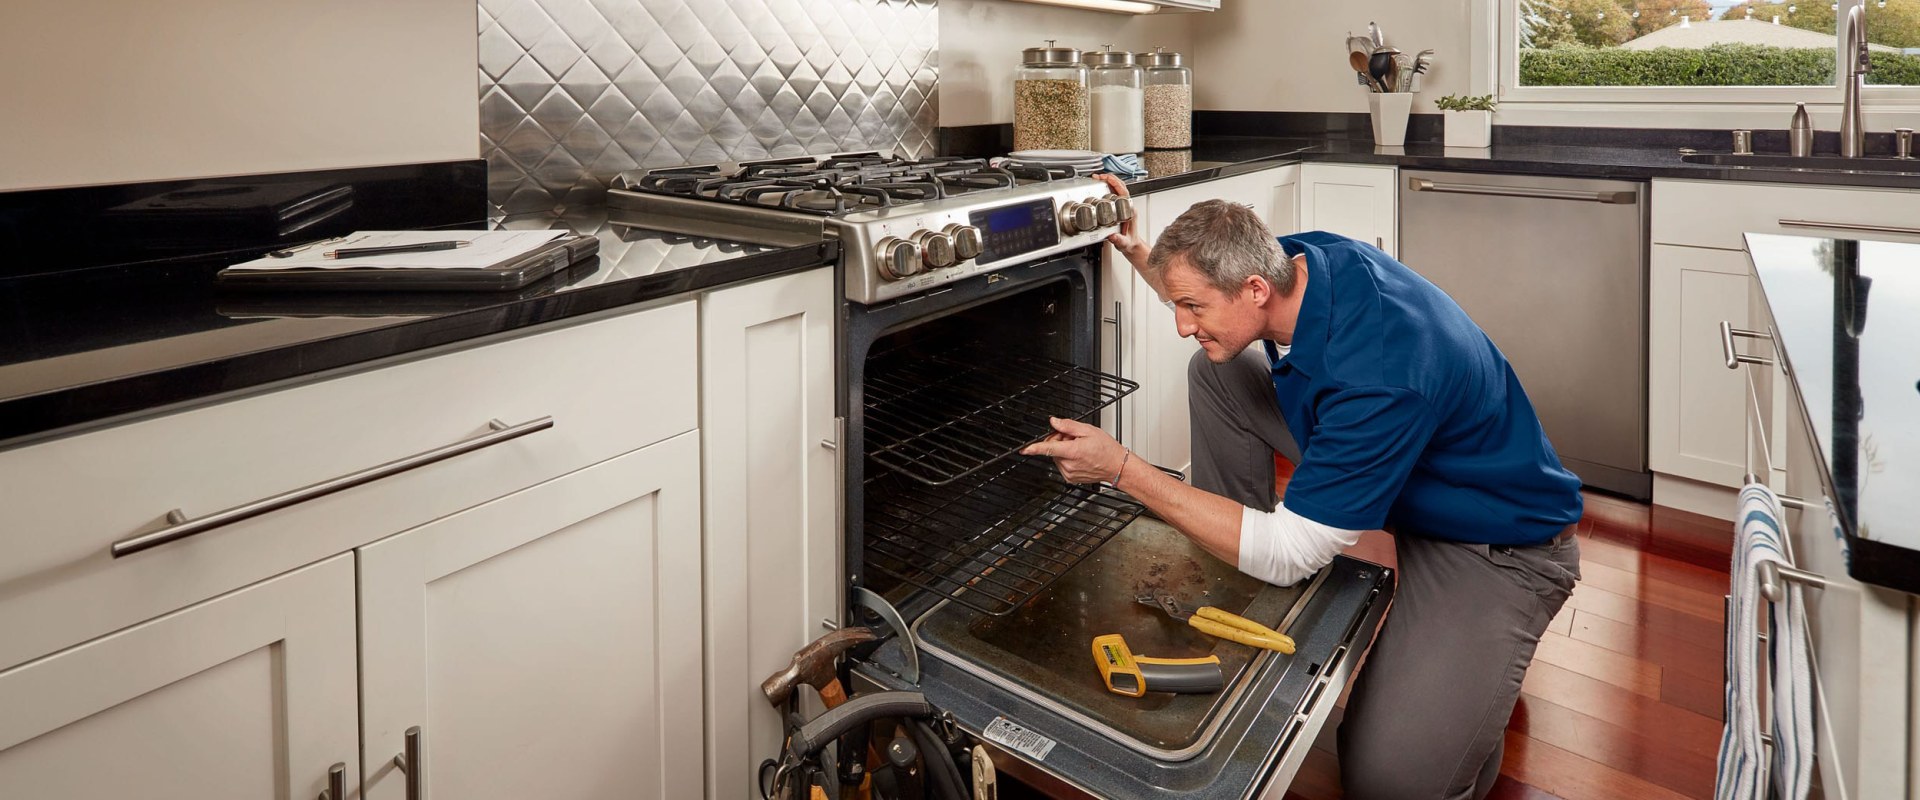 Home Appliances: The Most Important Things To Repair Before Selling A House In Baltimore